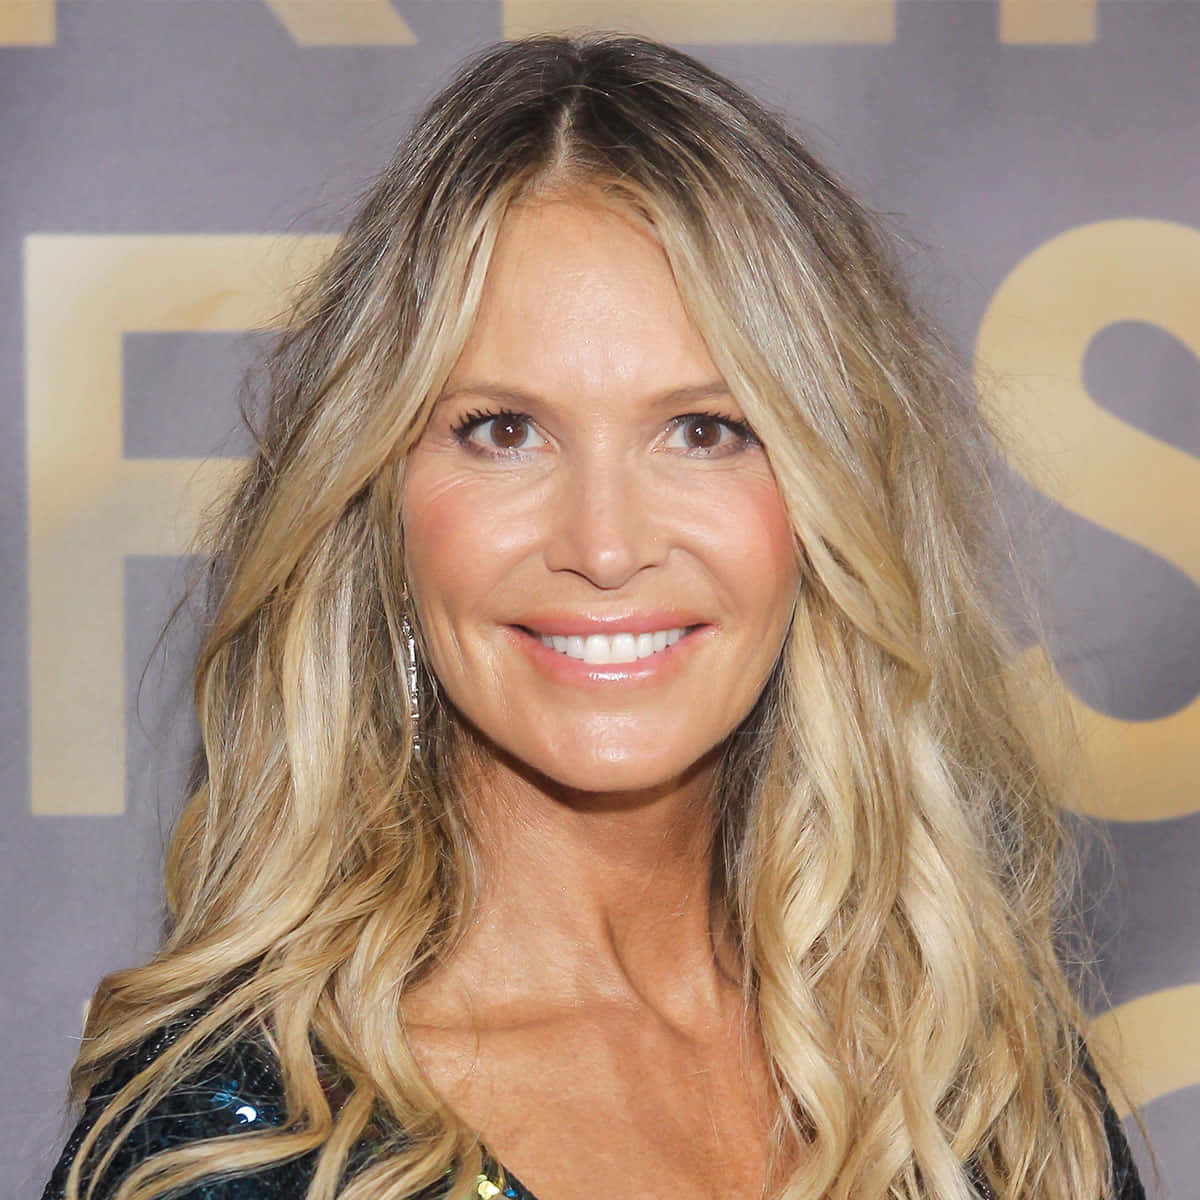 Elle Macpherson Gracefully Poses At A High-end Fashion Event Wallpaper